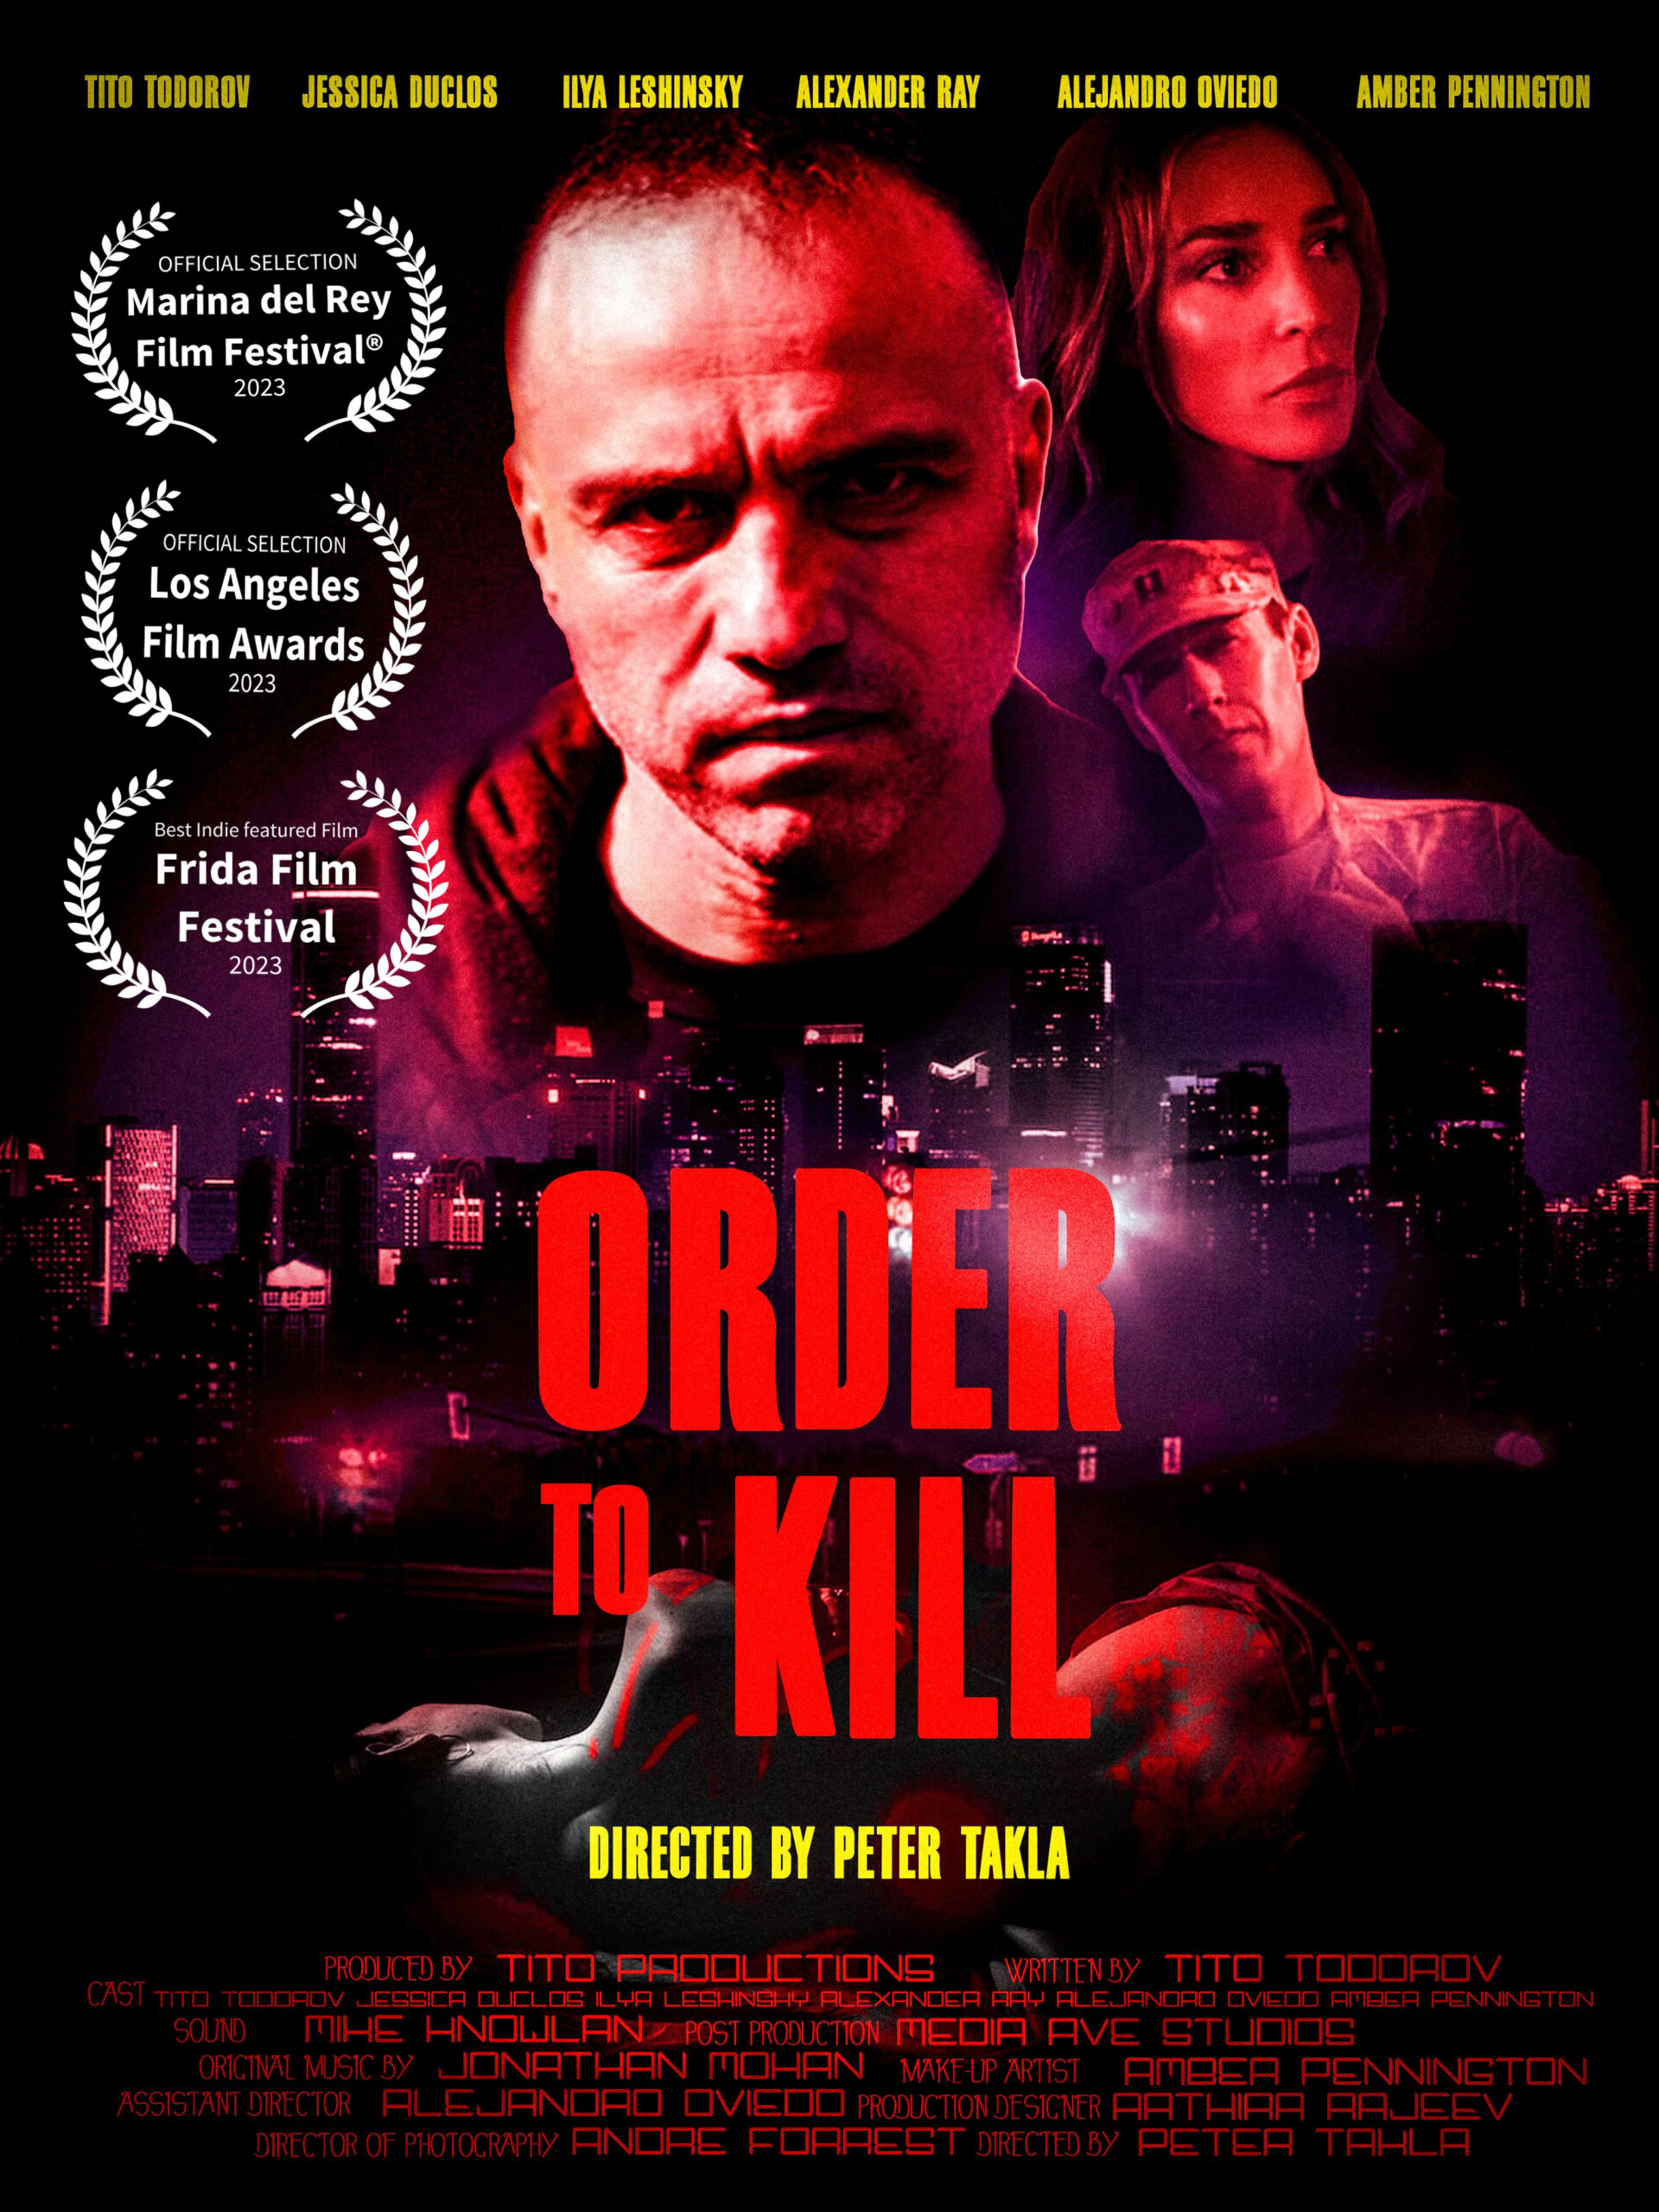 ORDER TO KILL FIRST TRAILER